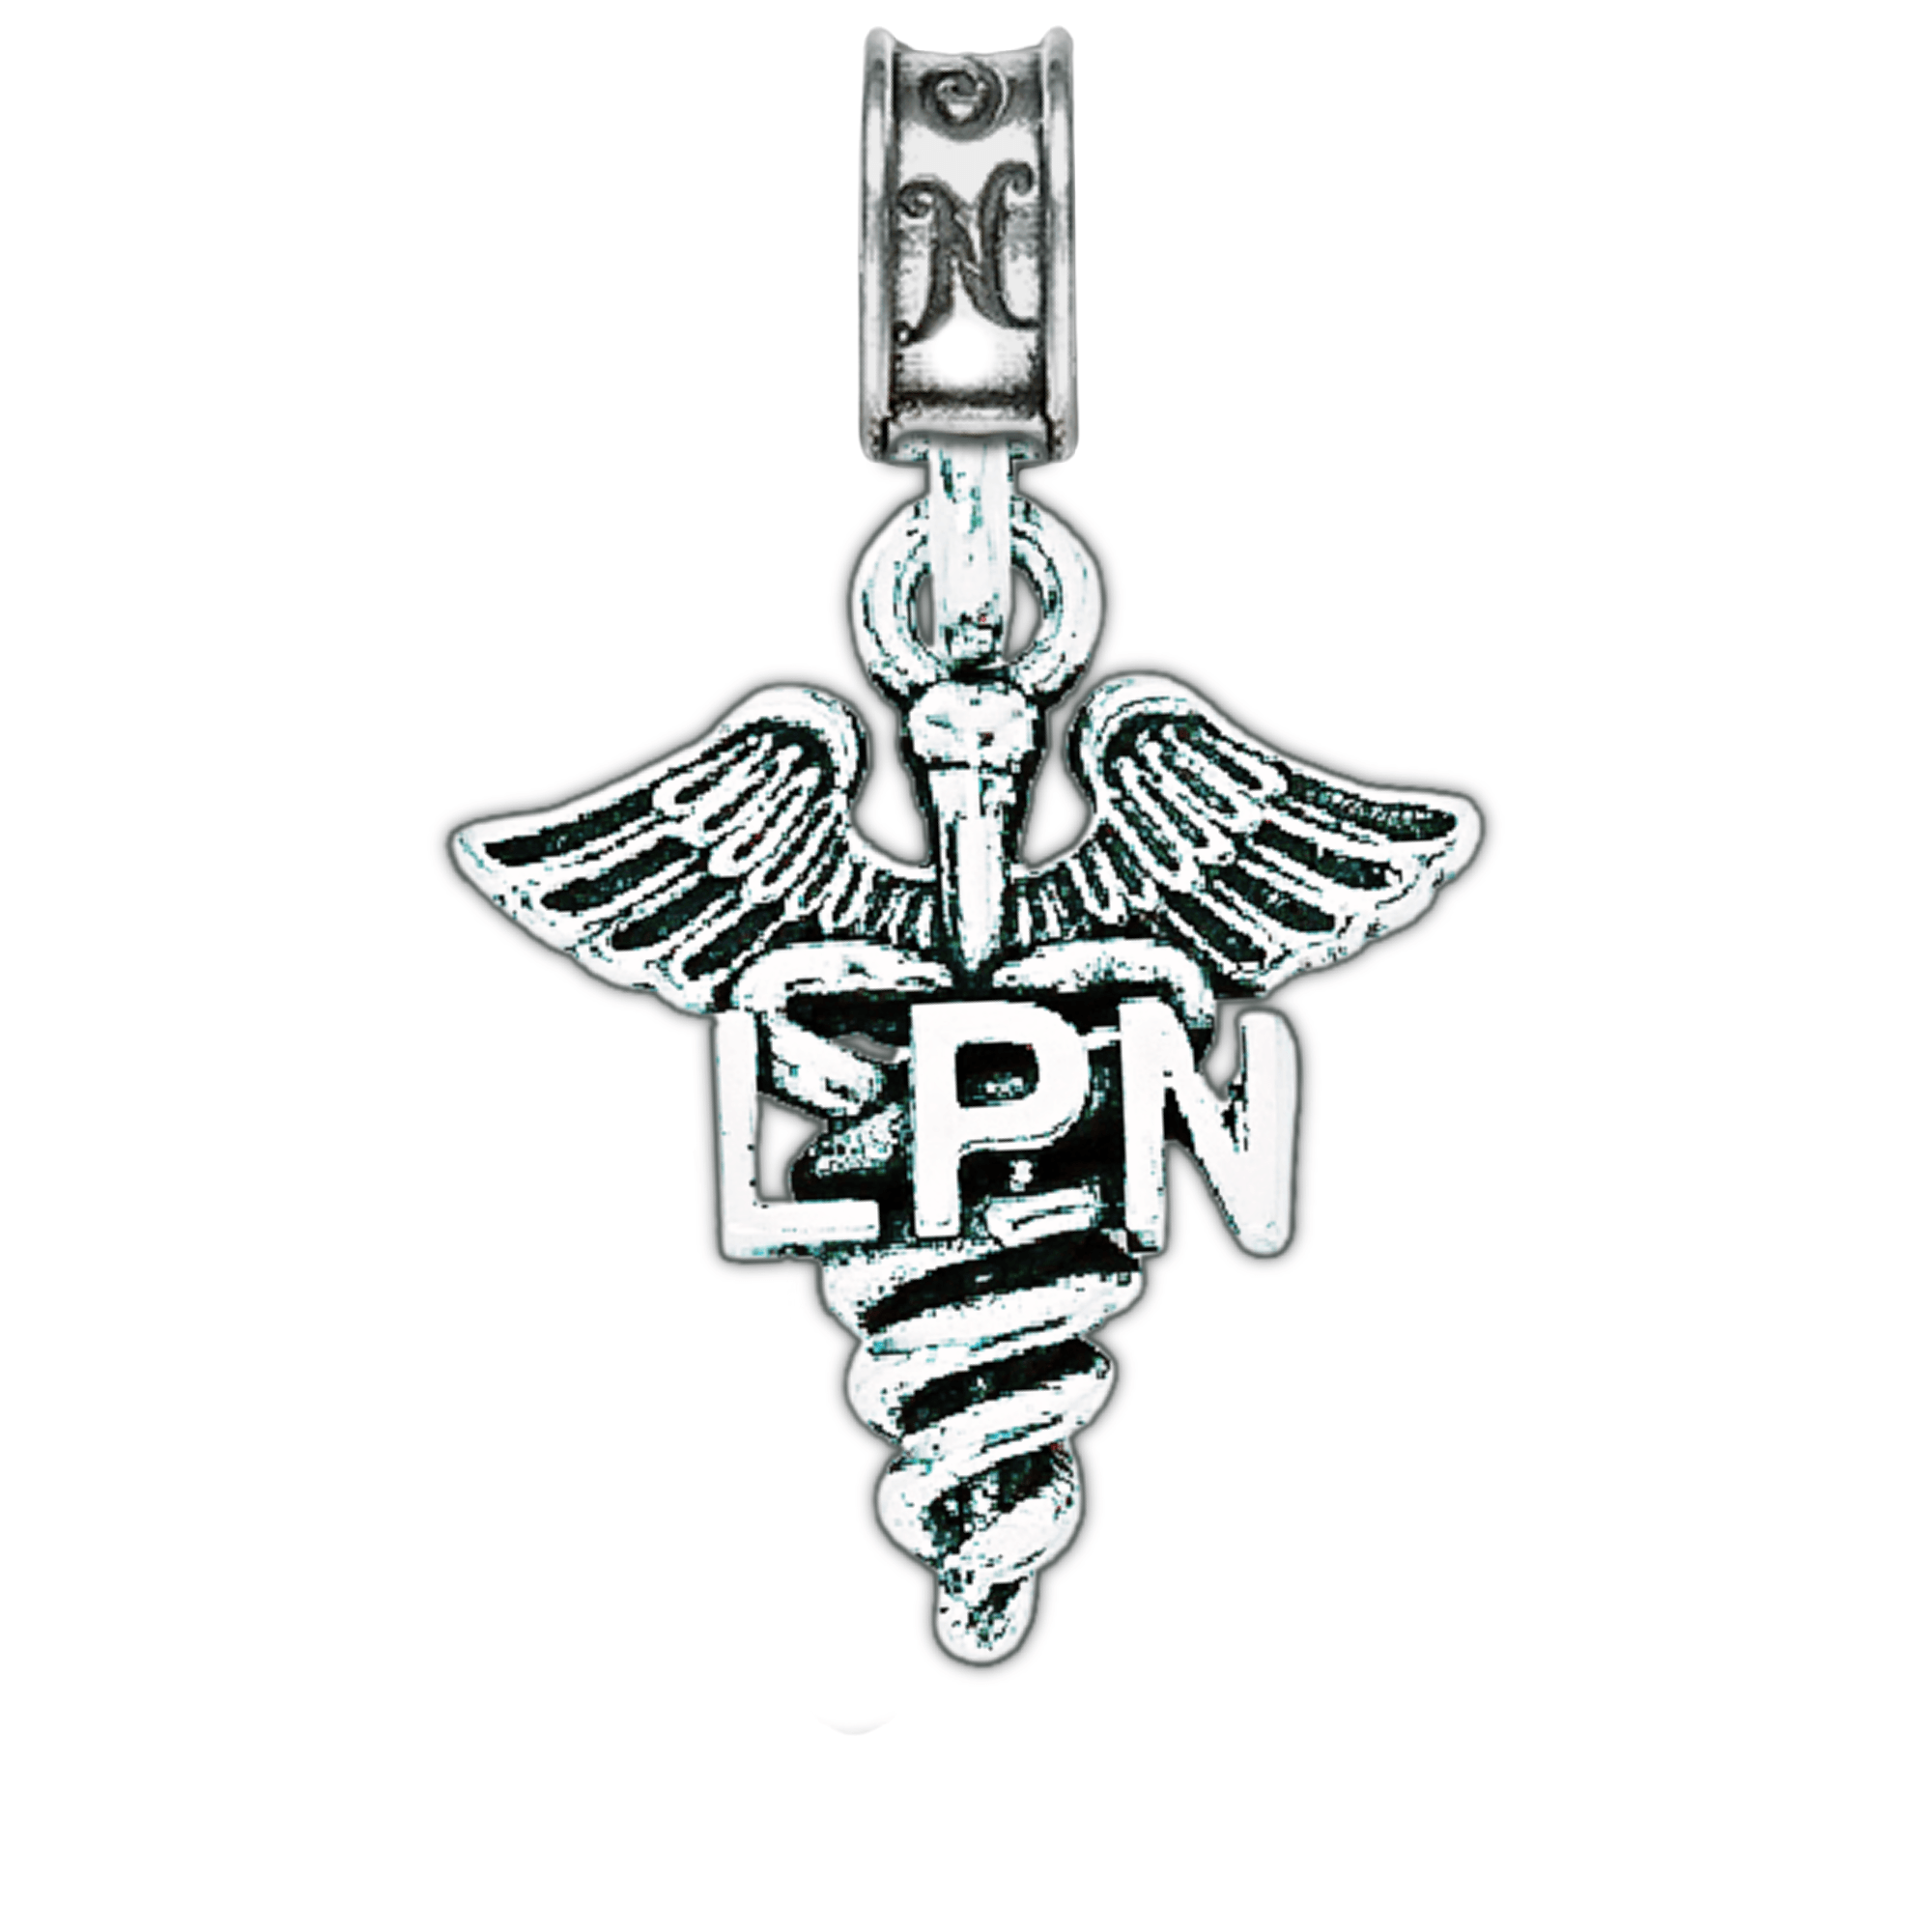 Military Jewelry, Military Charms, Military Gifts, Licensed Practical Nurse Charm, LPN Charm